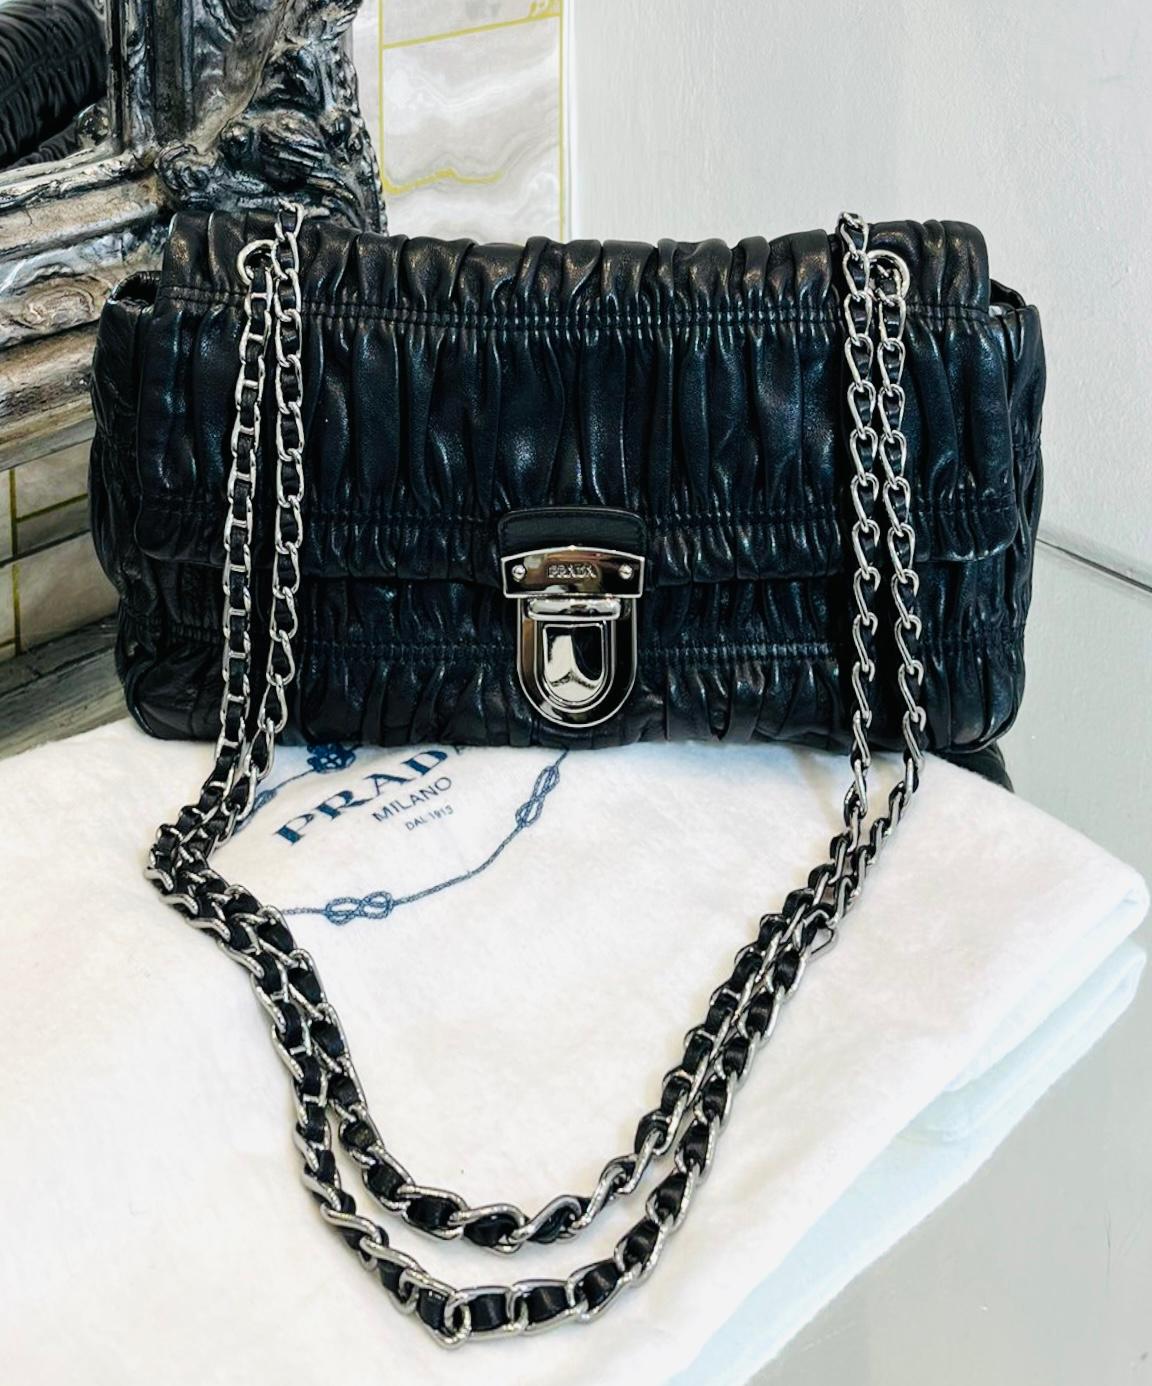 Prada Gaufre Leather Bag

Black bag designed with flap front and 'Prada' engraved clasp closure.

Detailed with soft ruched leather and silver chain and leather entwined shoulder strap.

Featuring ivory leather interior with zipped